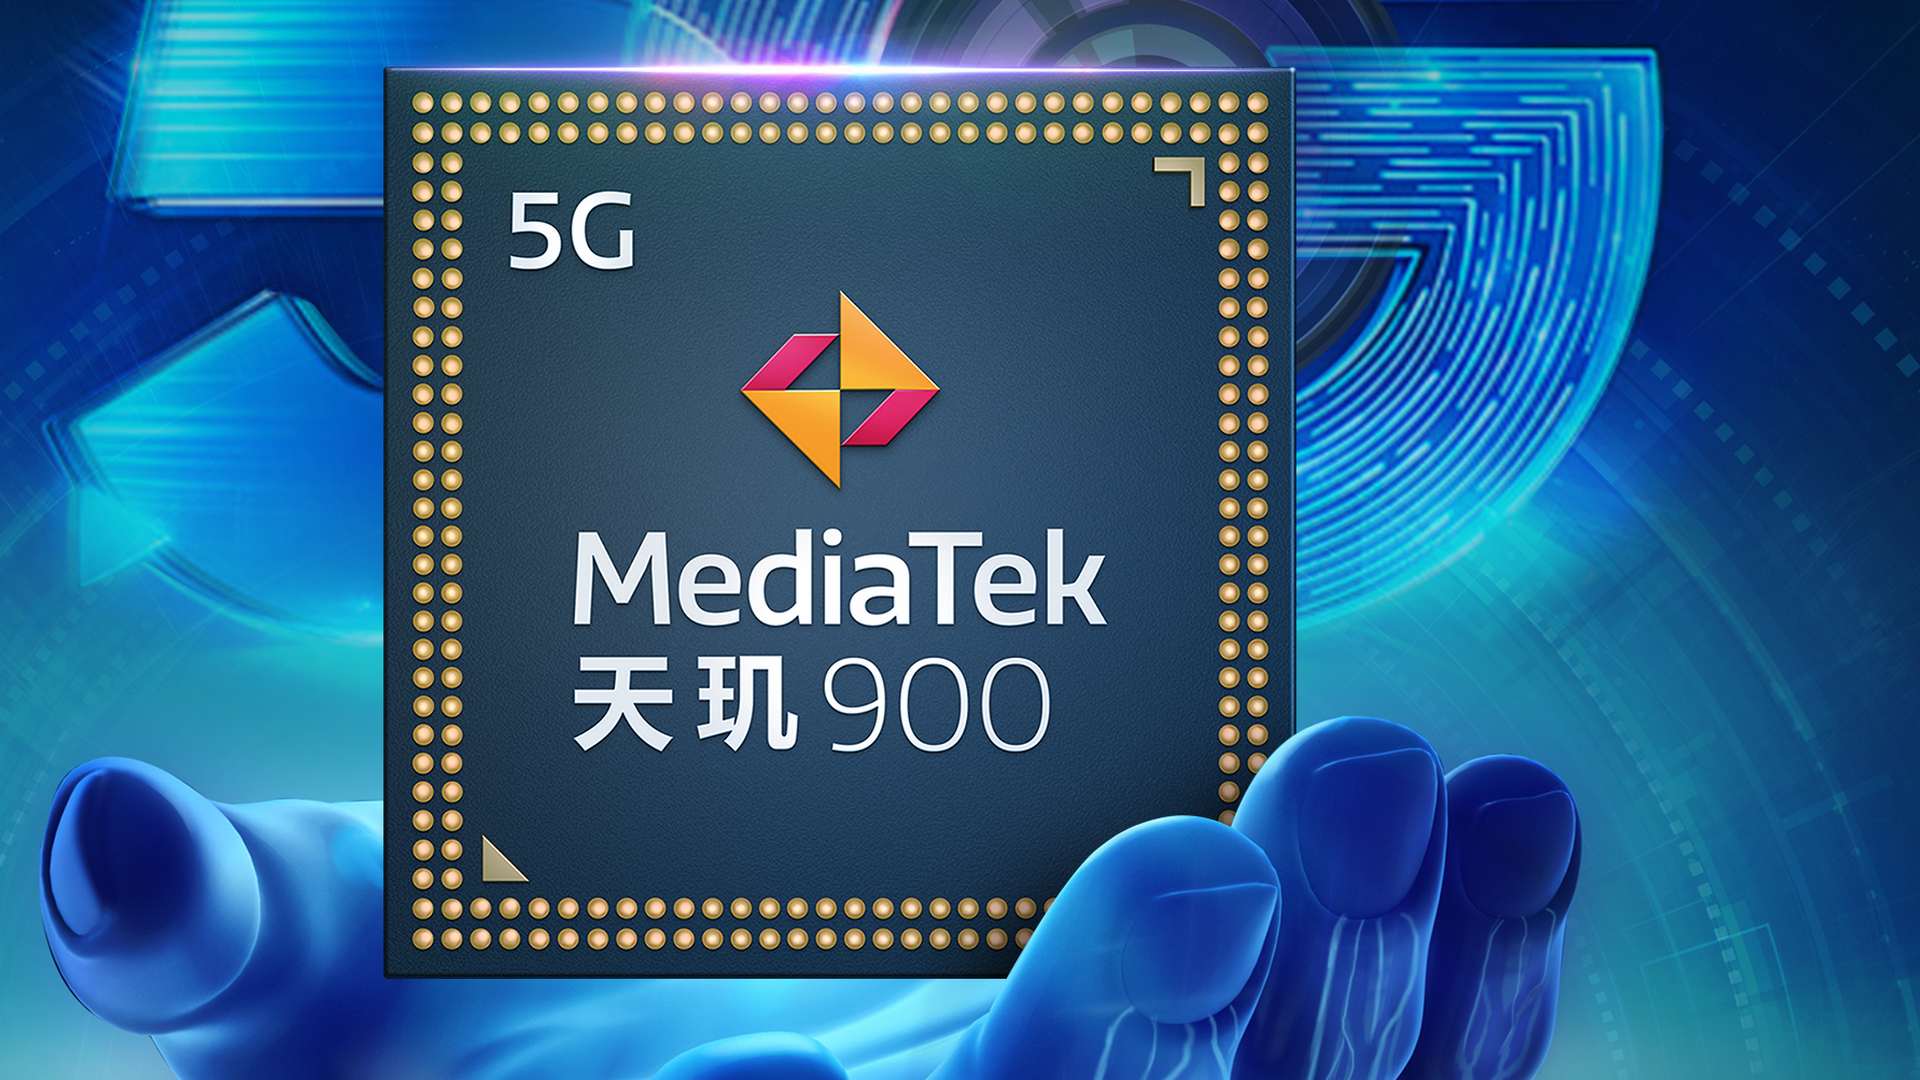 MediaTek Dimensity 900 official: all about the new 5G chipset - GizChina.it